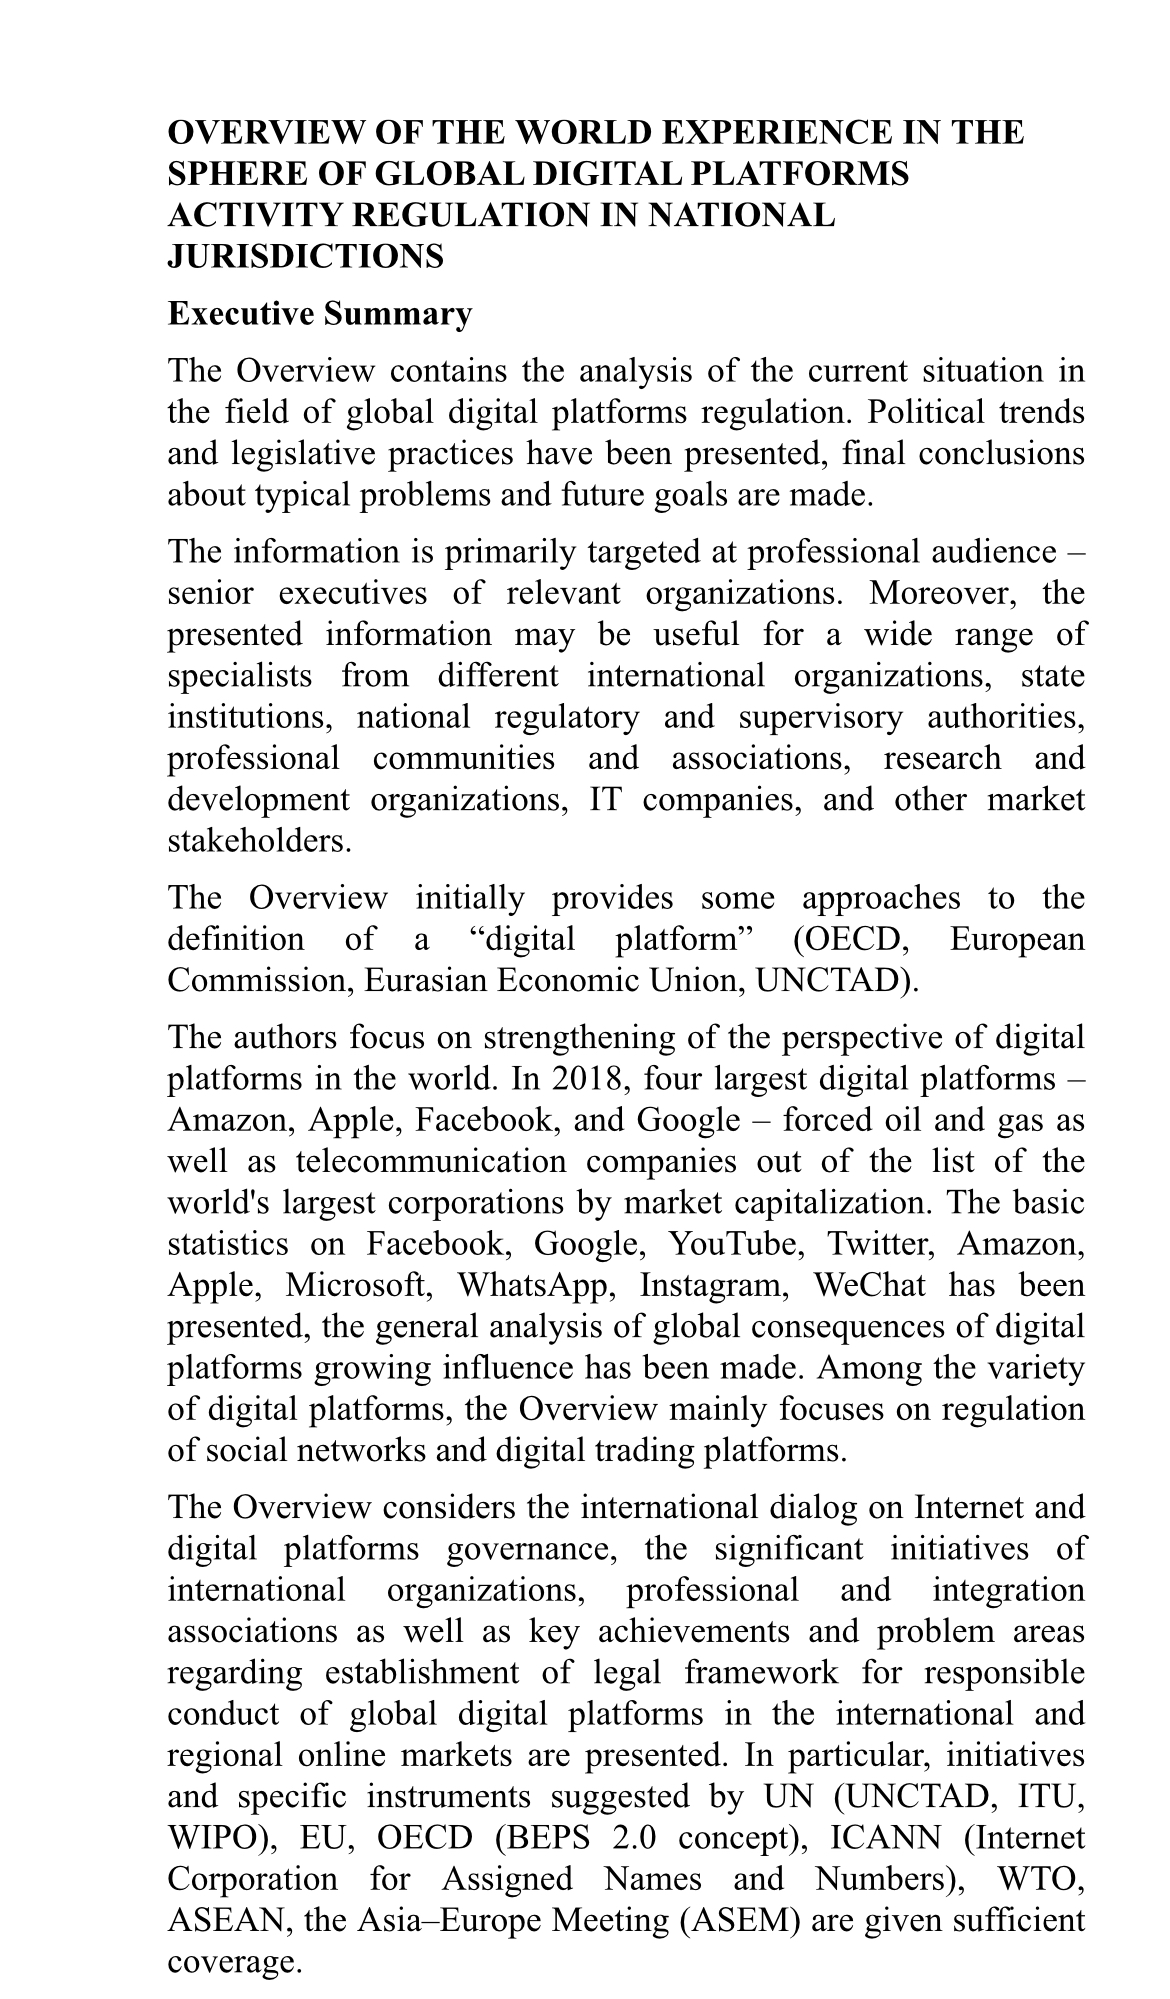 Overview оf the World Experience in the Sphere of Global Digital Platforms Activity Regulation in National Jurisdictions